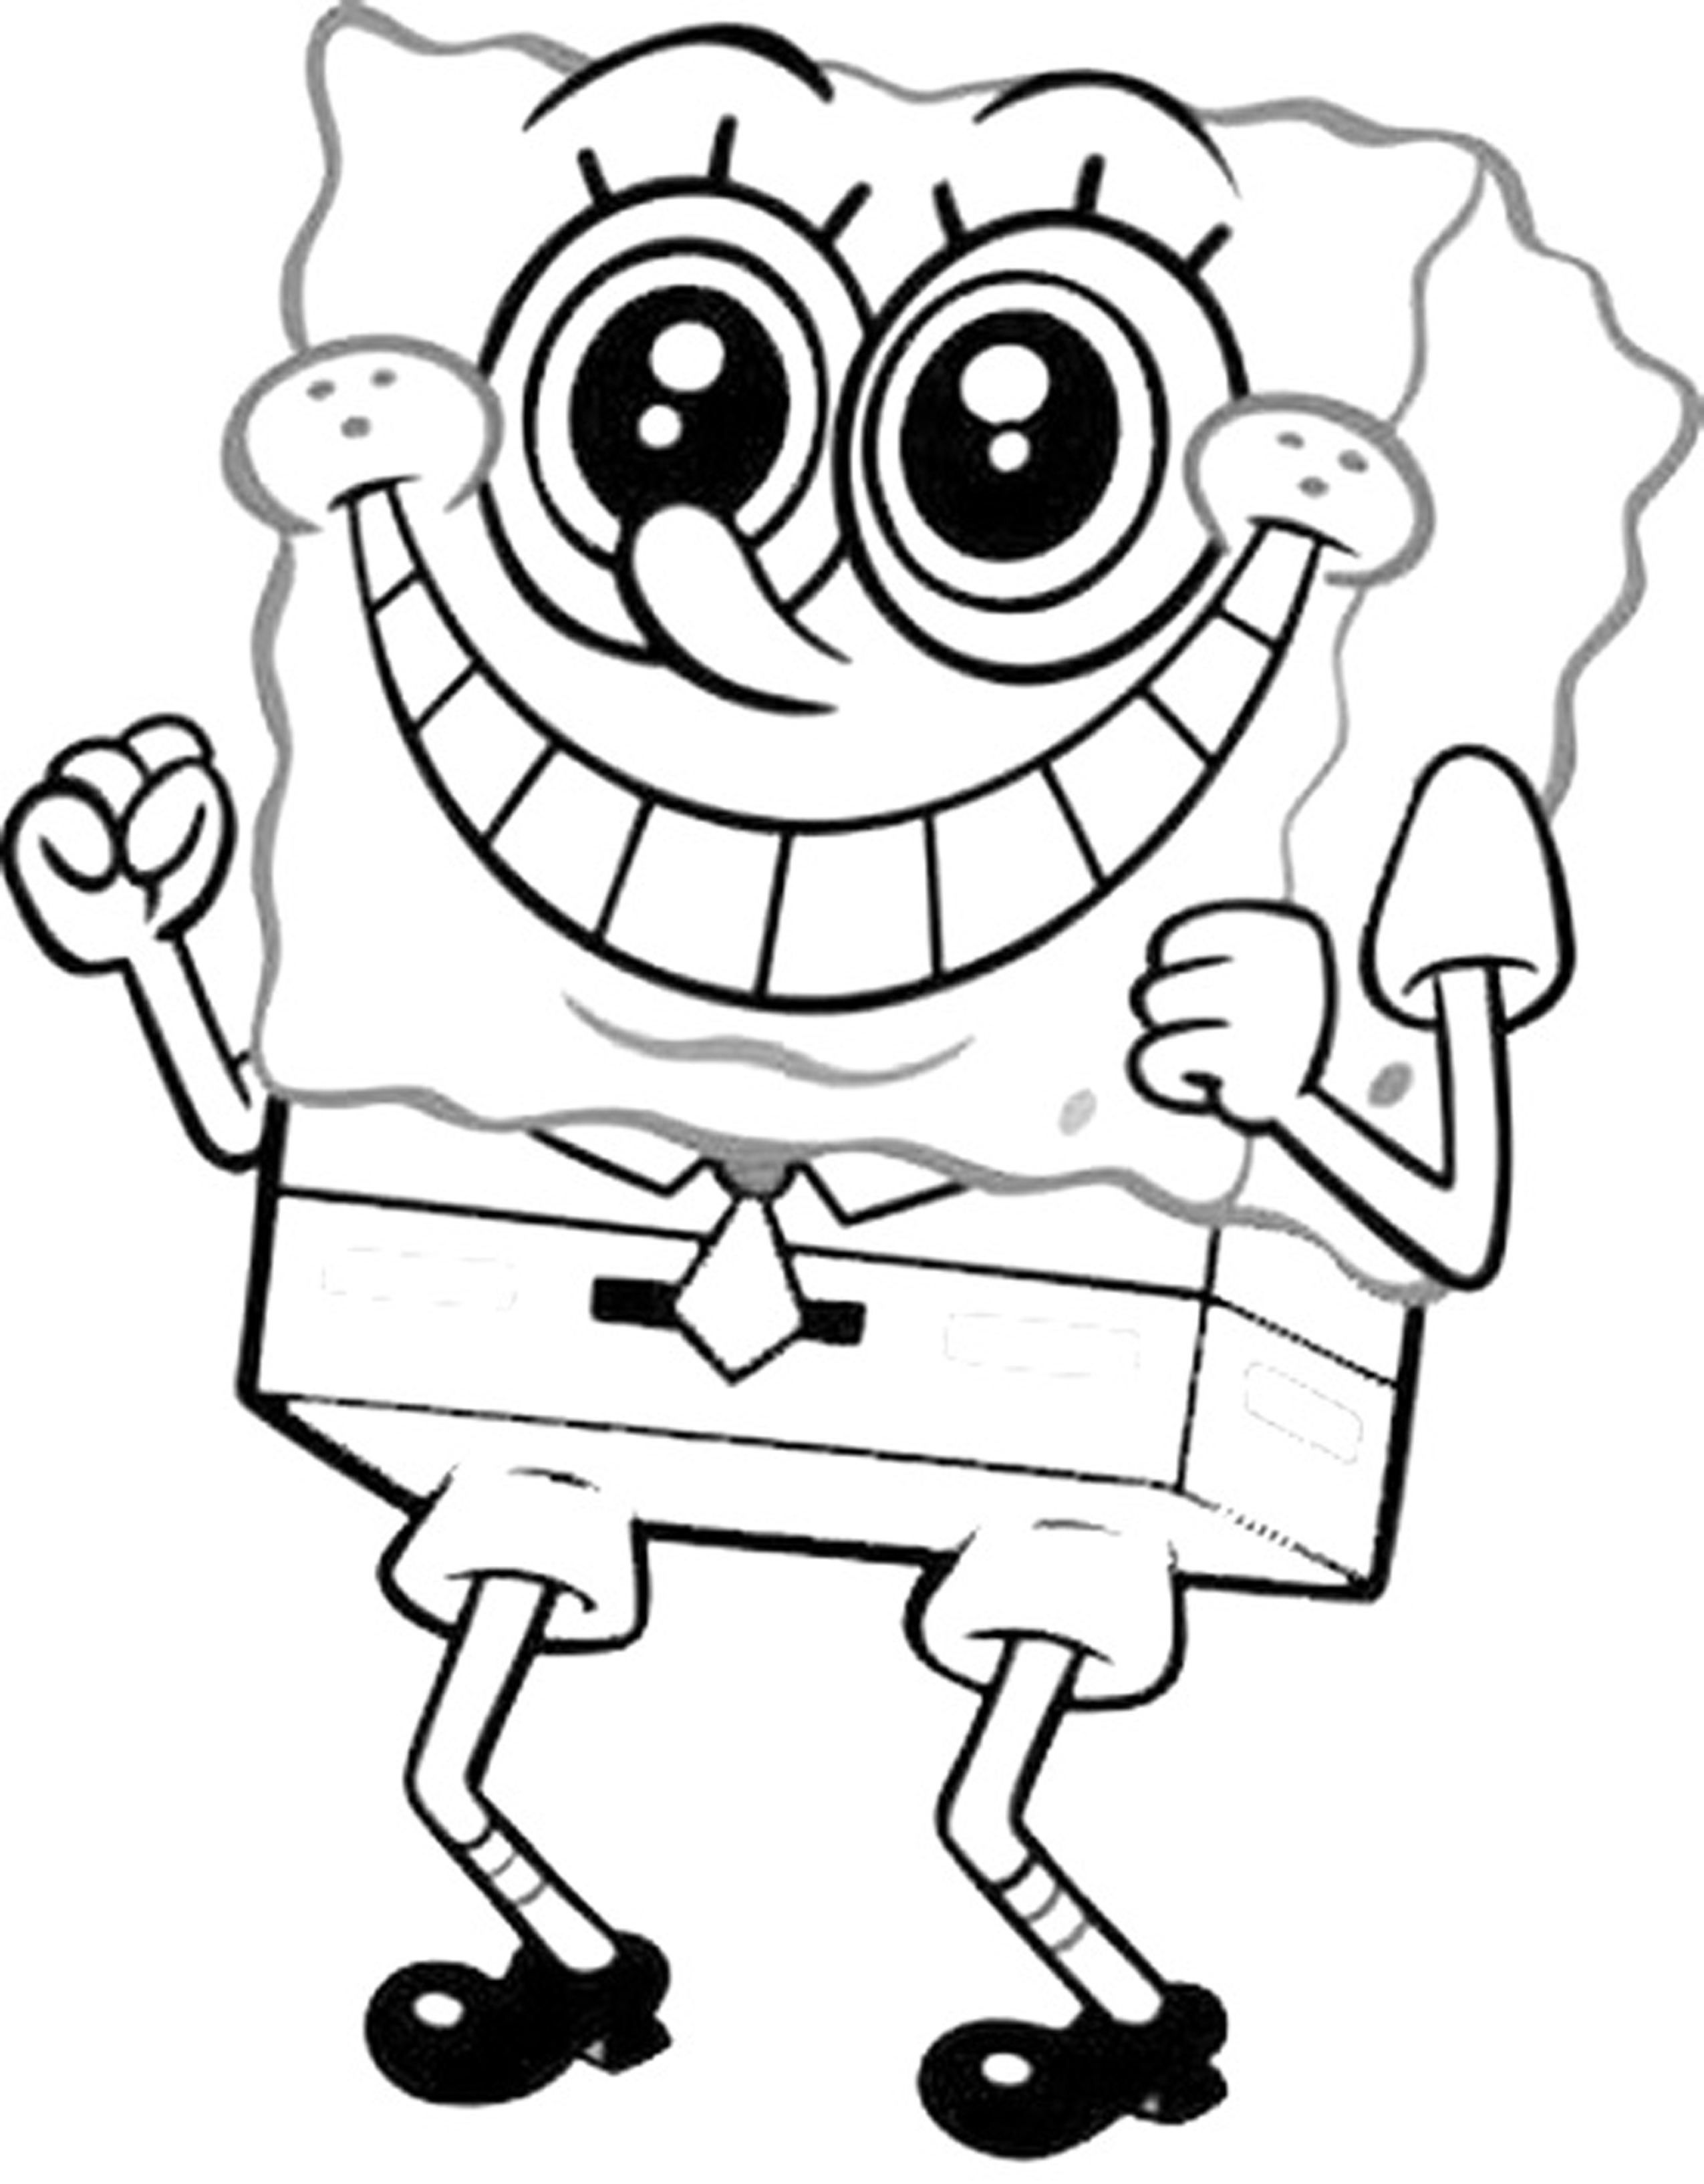 Funny Spongebob Coloring Pages Printables 66